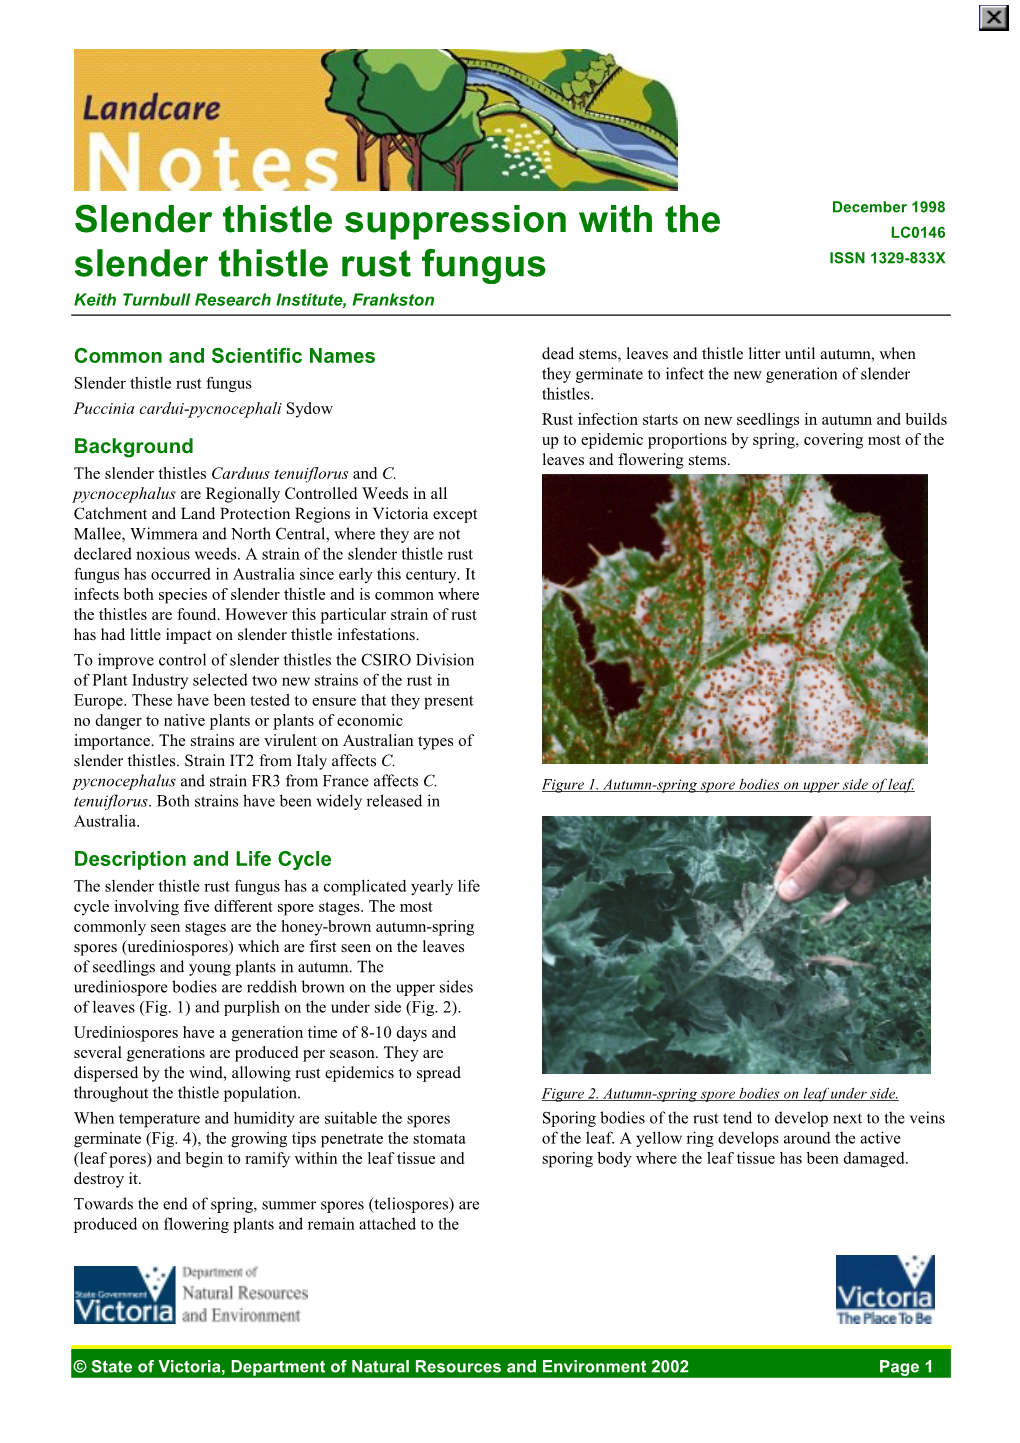 Slender Thistle Suppression with the Slender Thistle Rust Fungus (DSE Vic)